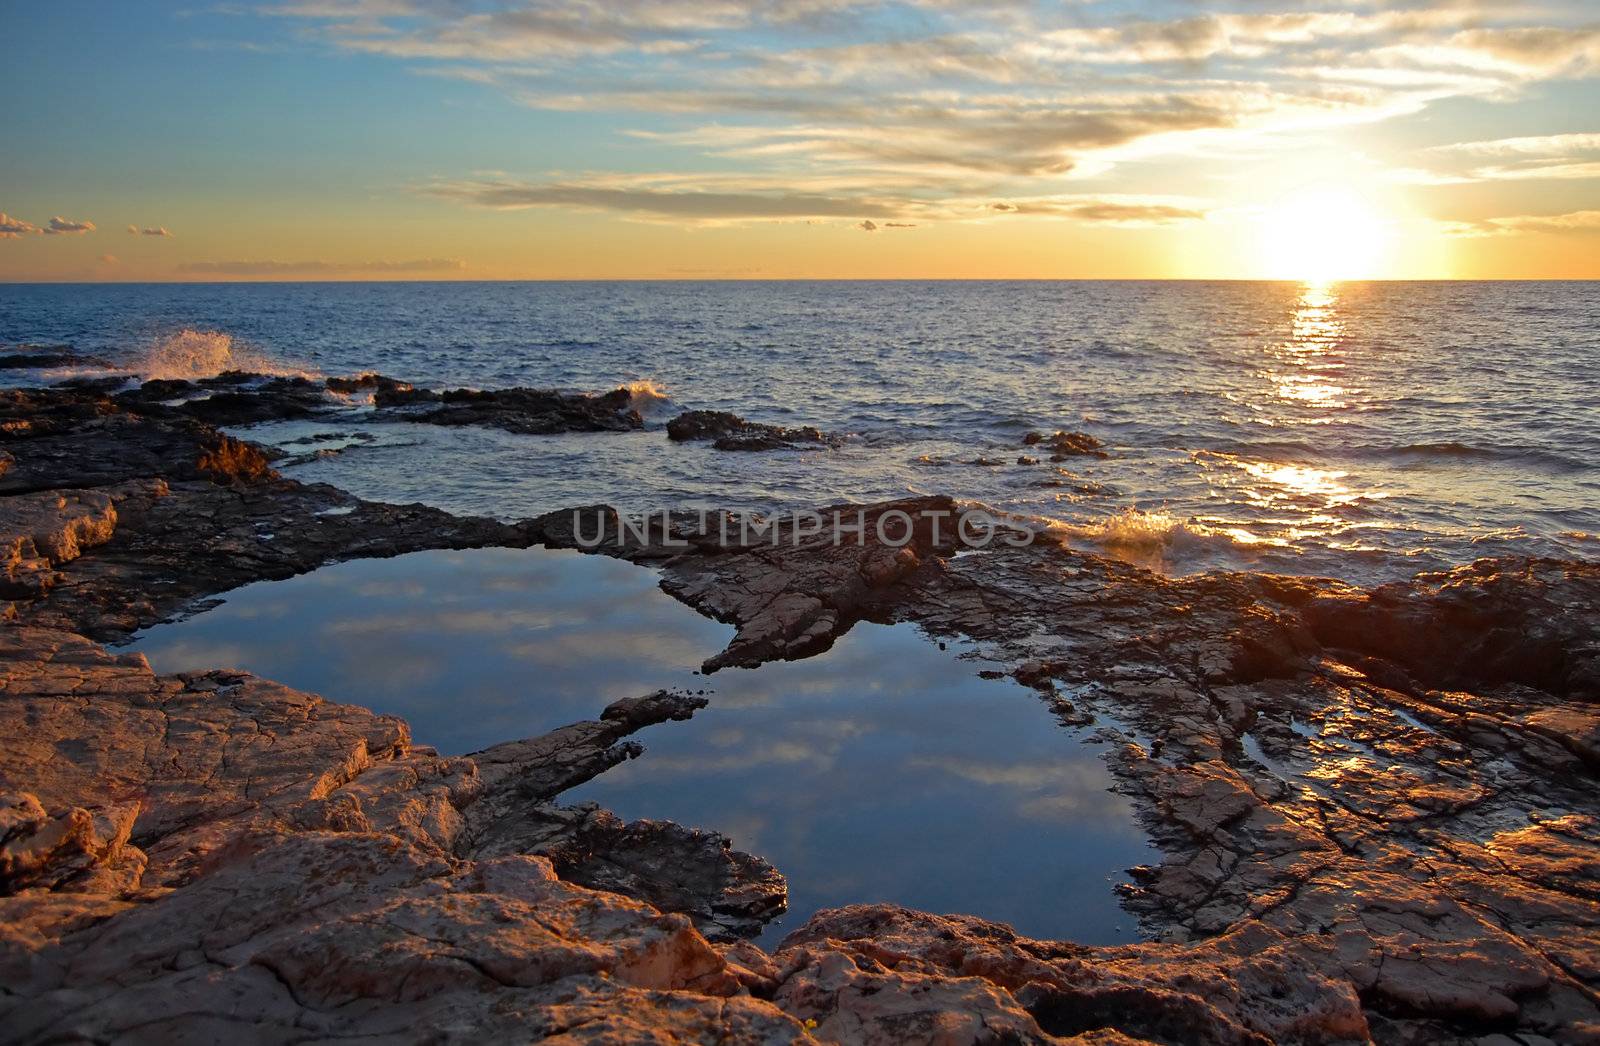 Sunset on a rocky coastline with a puddle